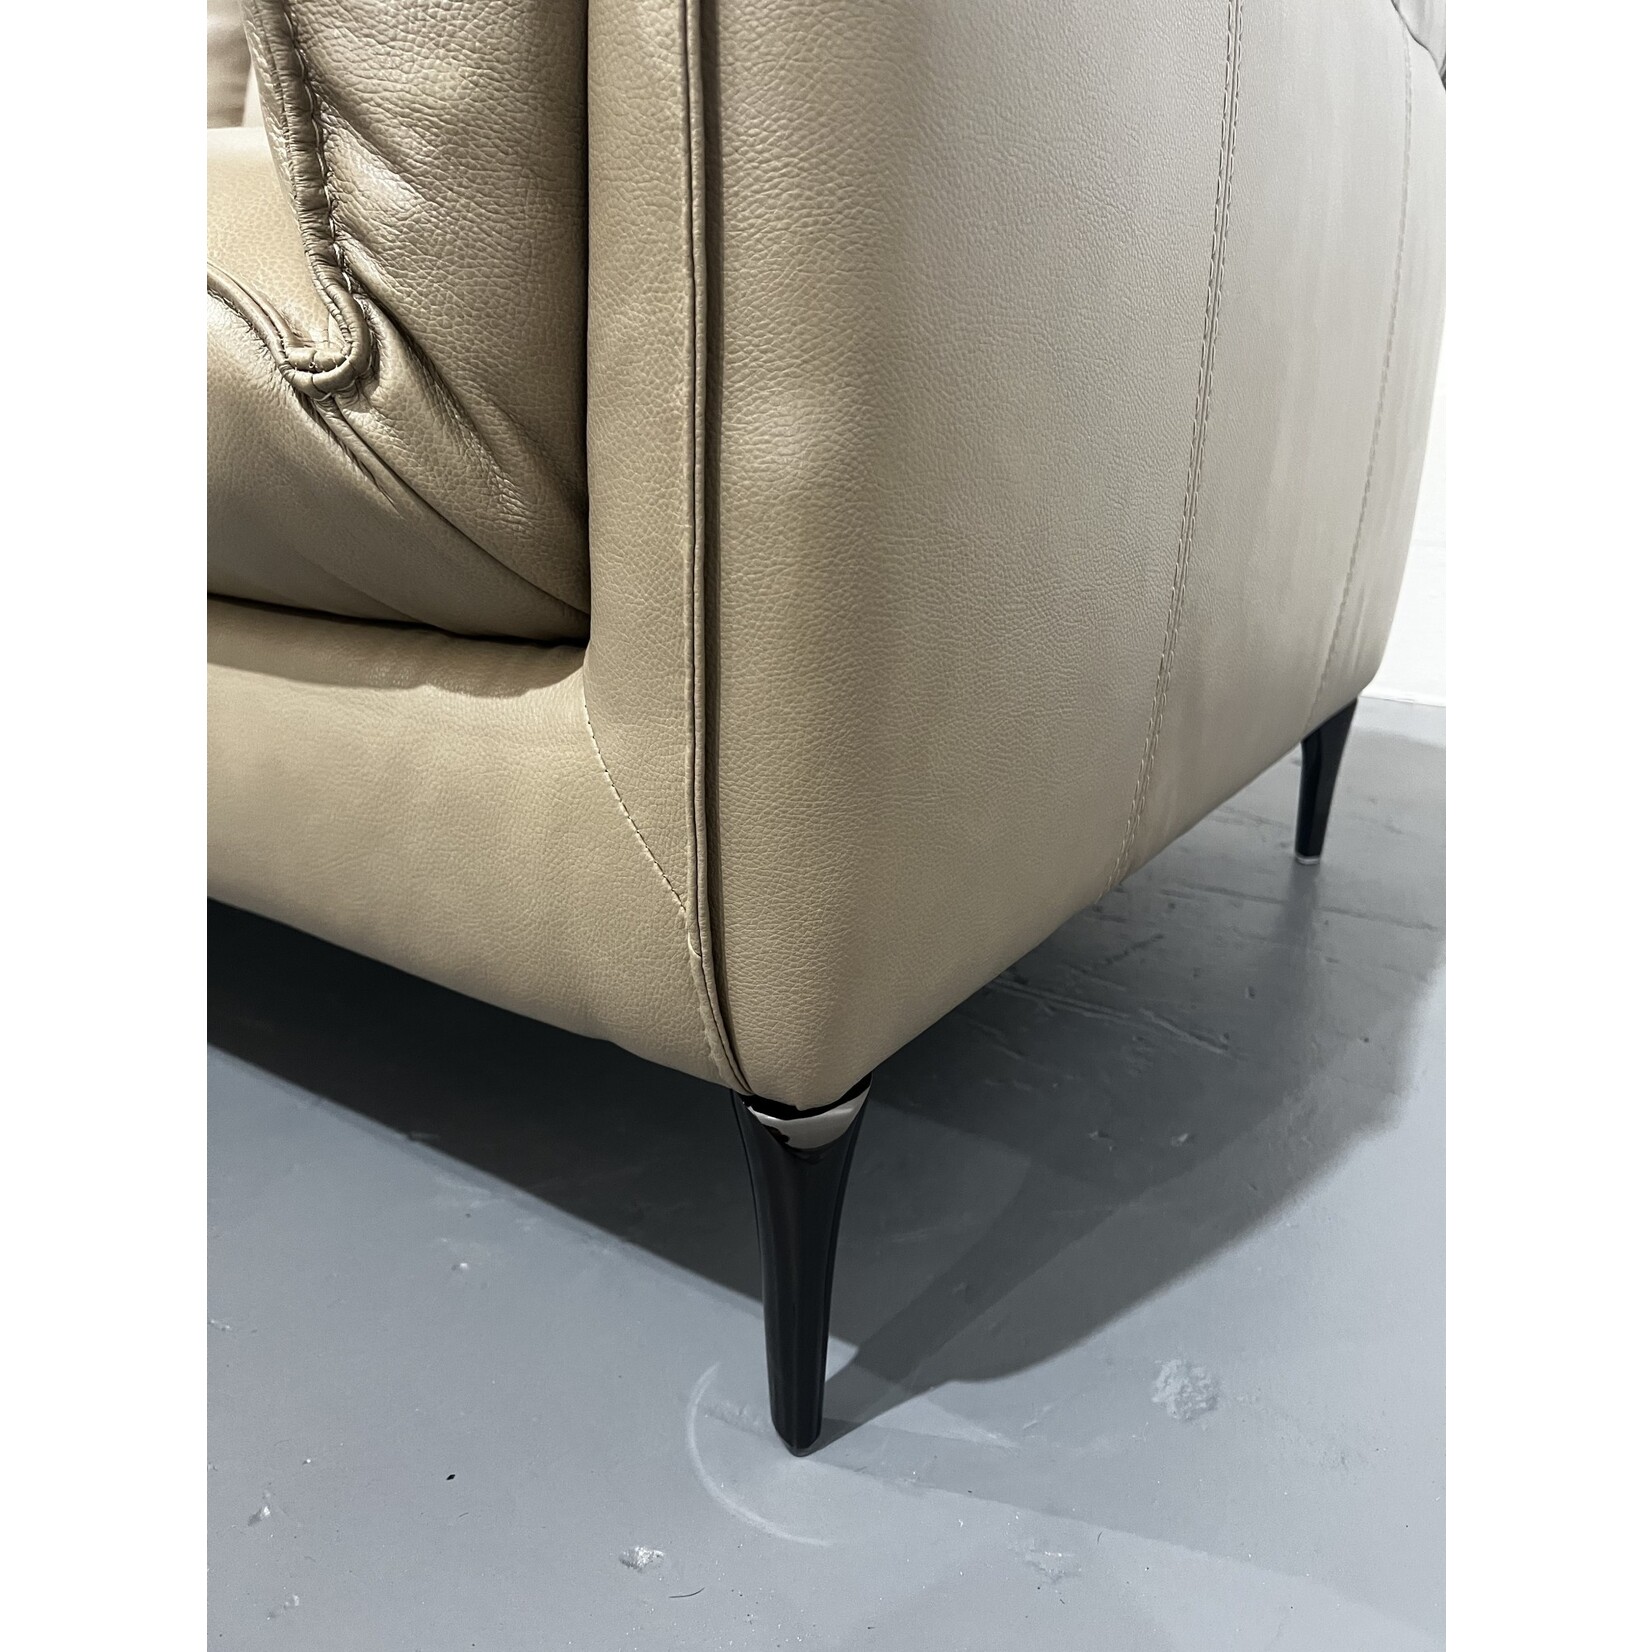 33486-LM-3P Sofa GLM5007 Taupe Leather